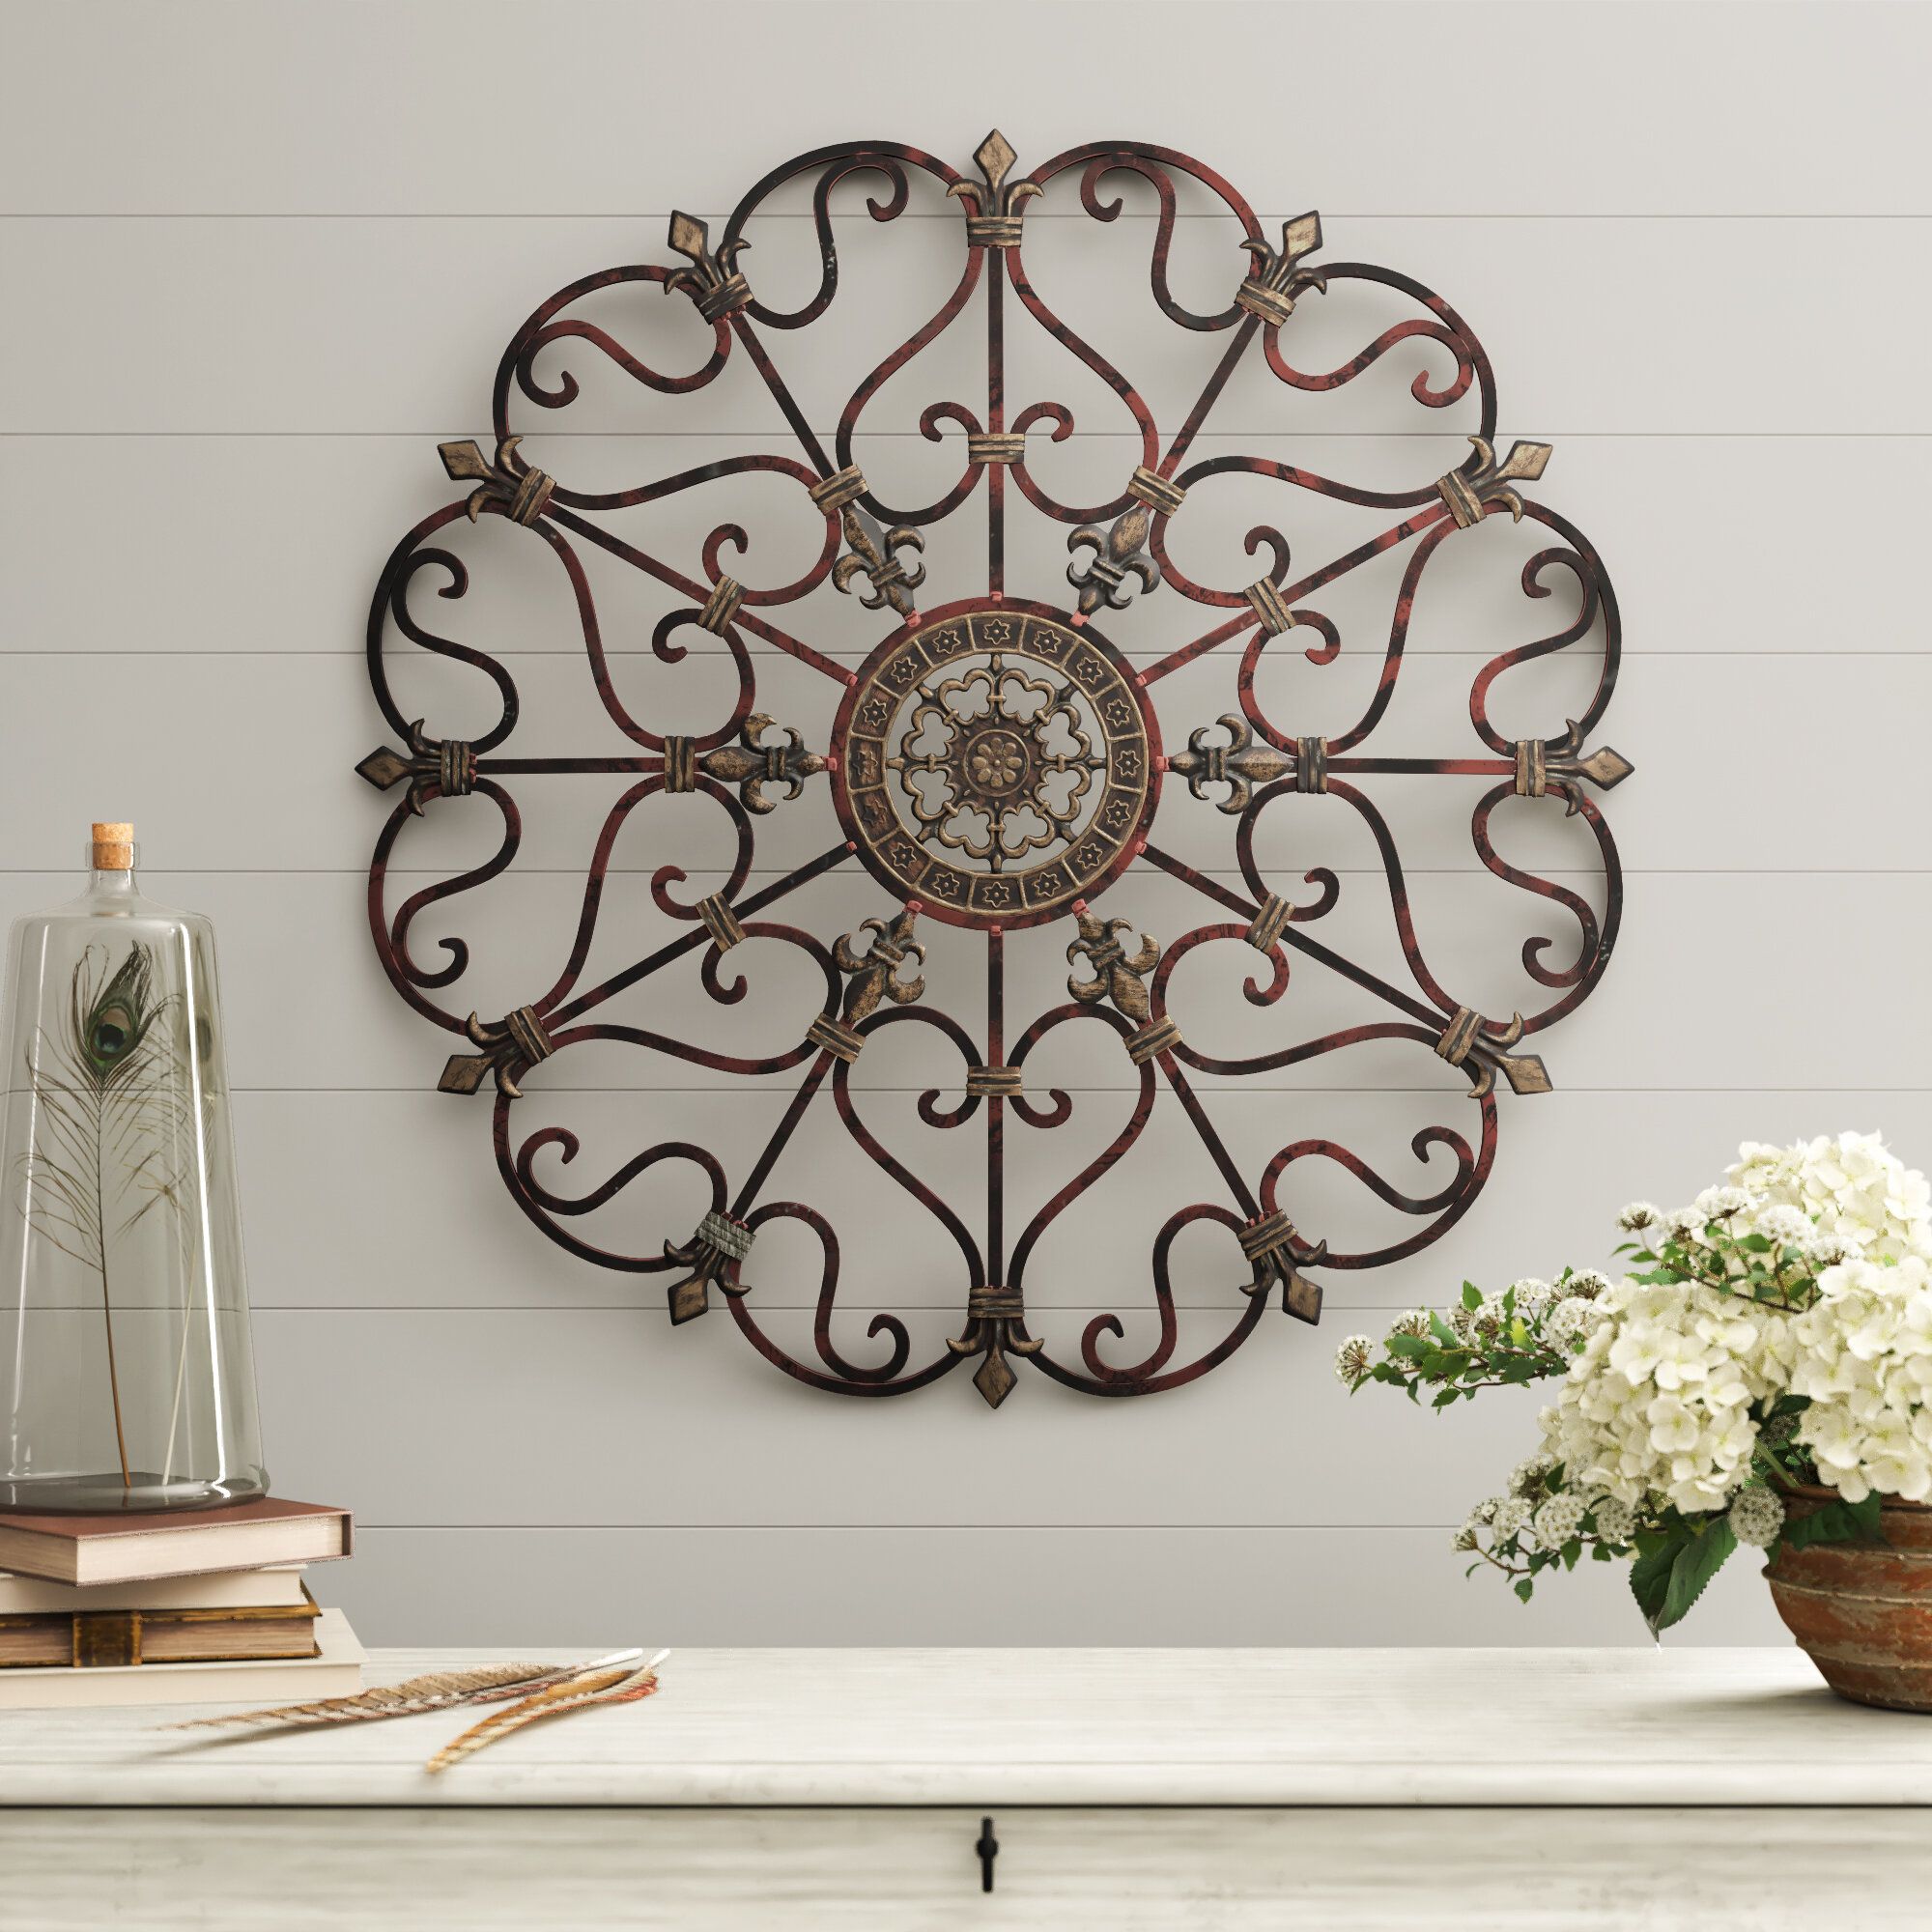 Farmhouse & Rustic Wall Decor | Birch Lane For Choose Happiness 3d Cursive Metal Wall Decor (View 29 of 30)